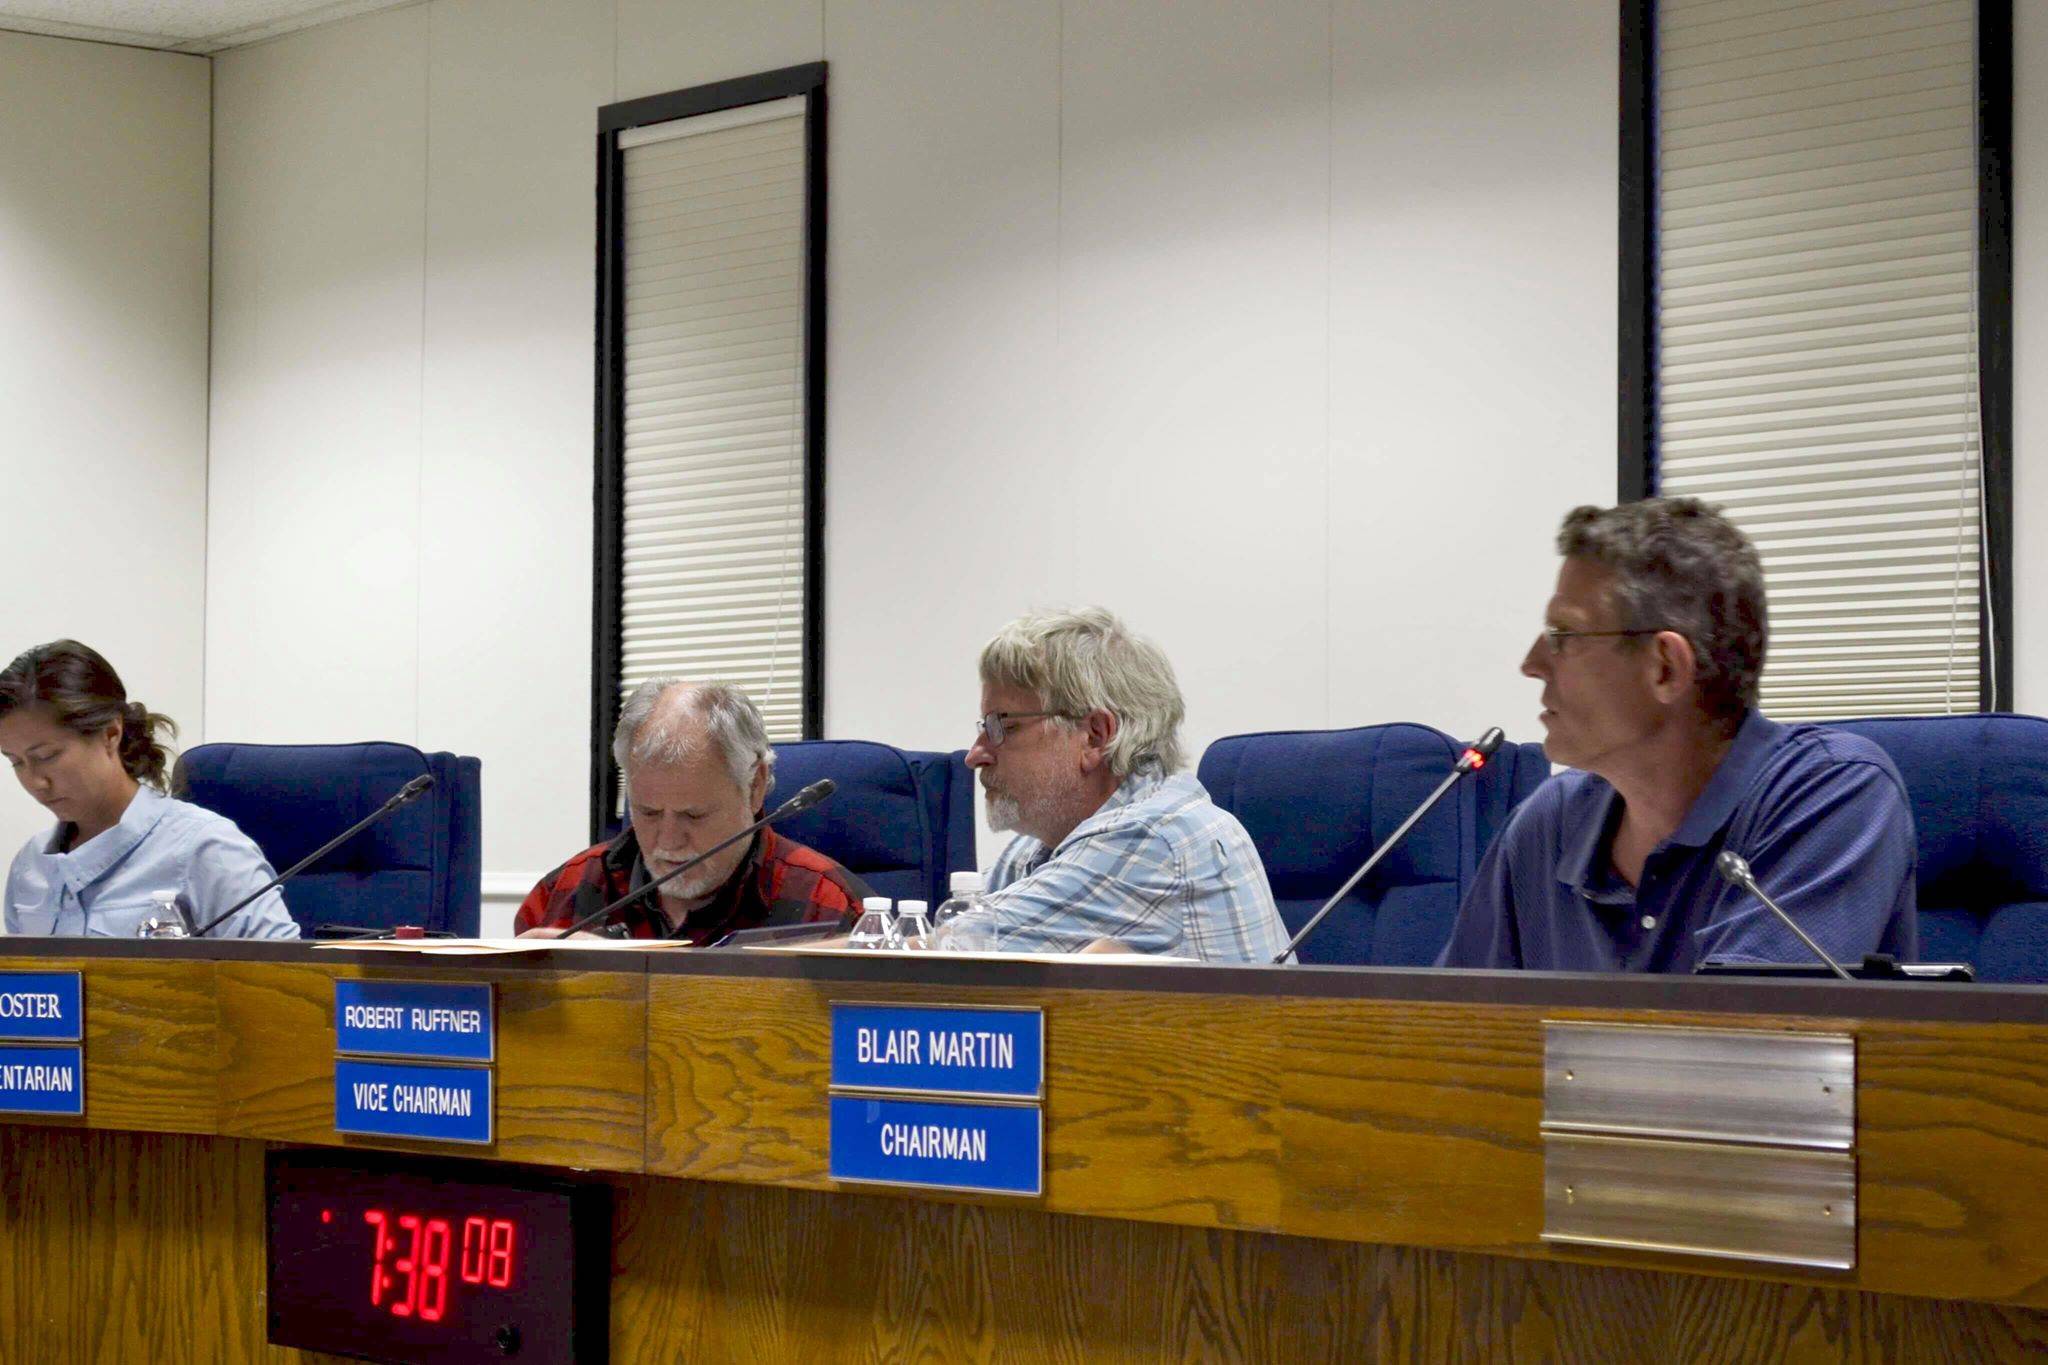 Kenai Peninsula Borough Planning Commission Chairman Blair Martin, Vice Chairman Robert Ruffner and Parliamentarian Rick Foster facilitate discussions on a gravel pit permit application on Monday, June 24, 2019, in Soldotna, Alaska. (Photo by Victoria Petersen/Peninsula Clarion)